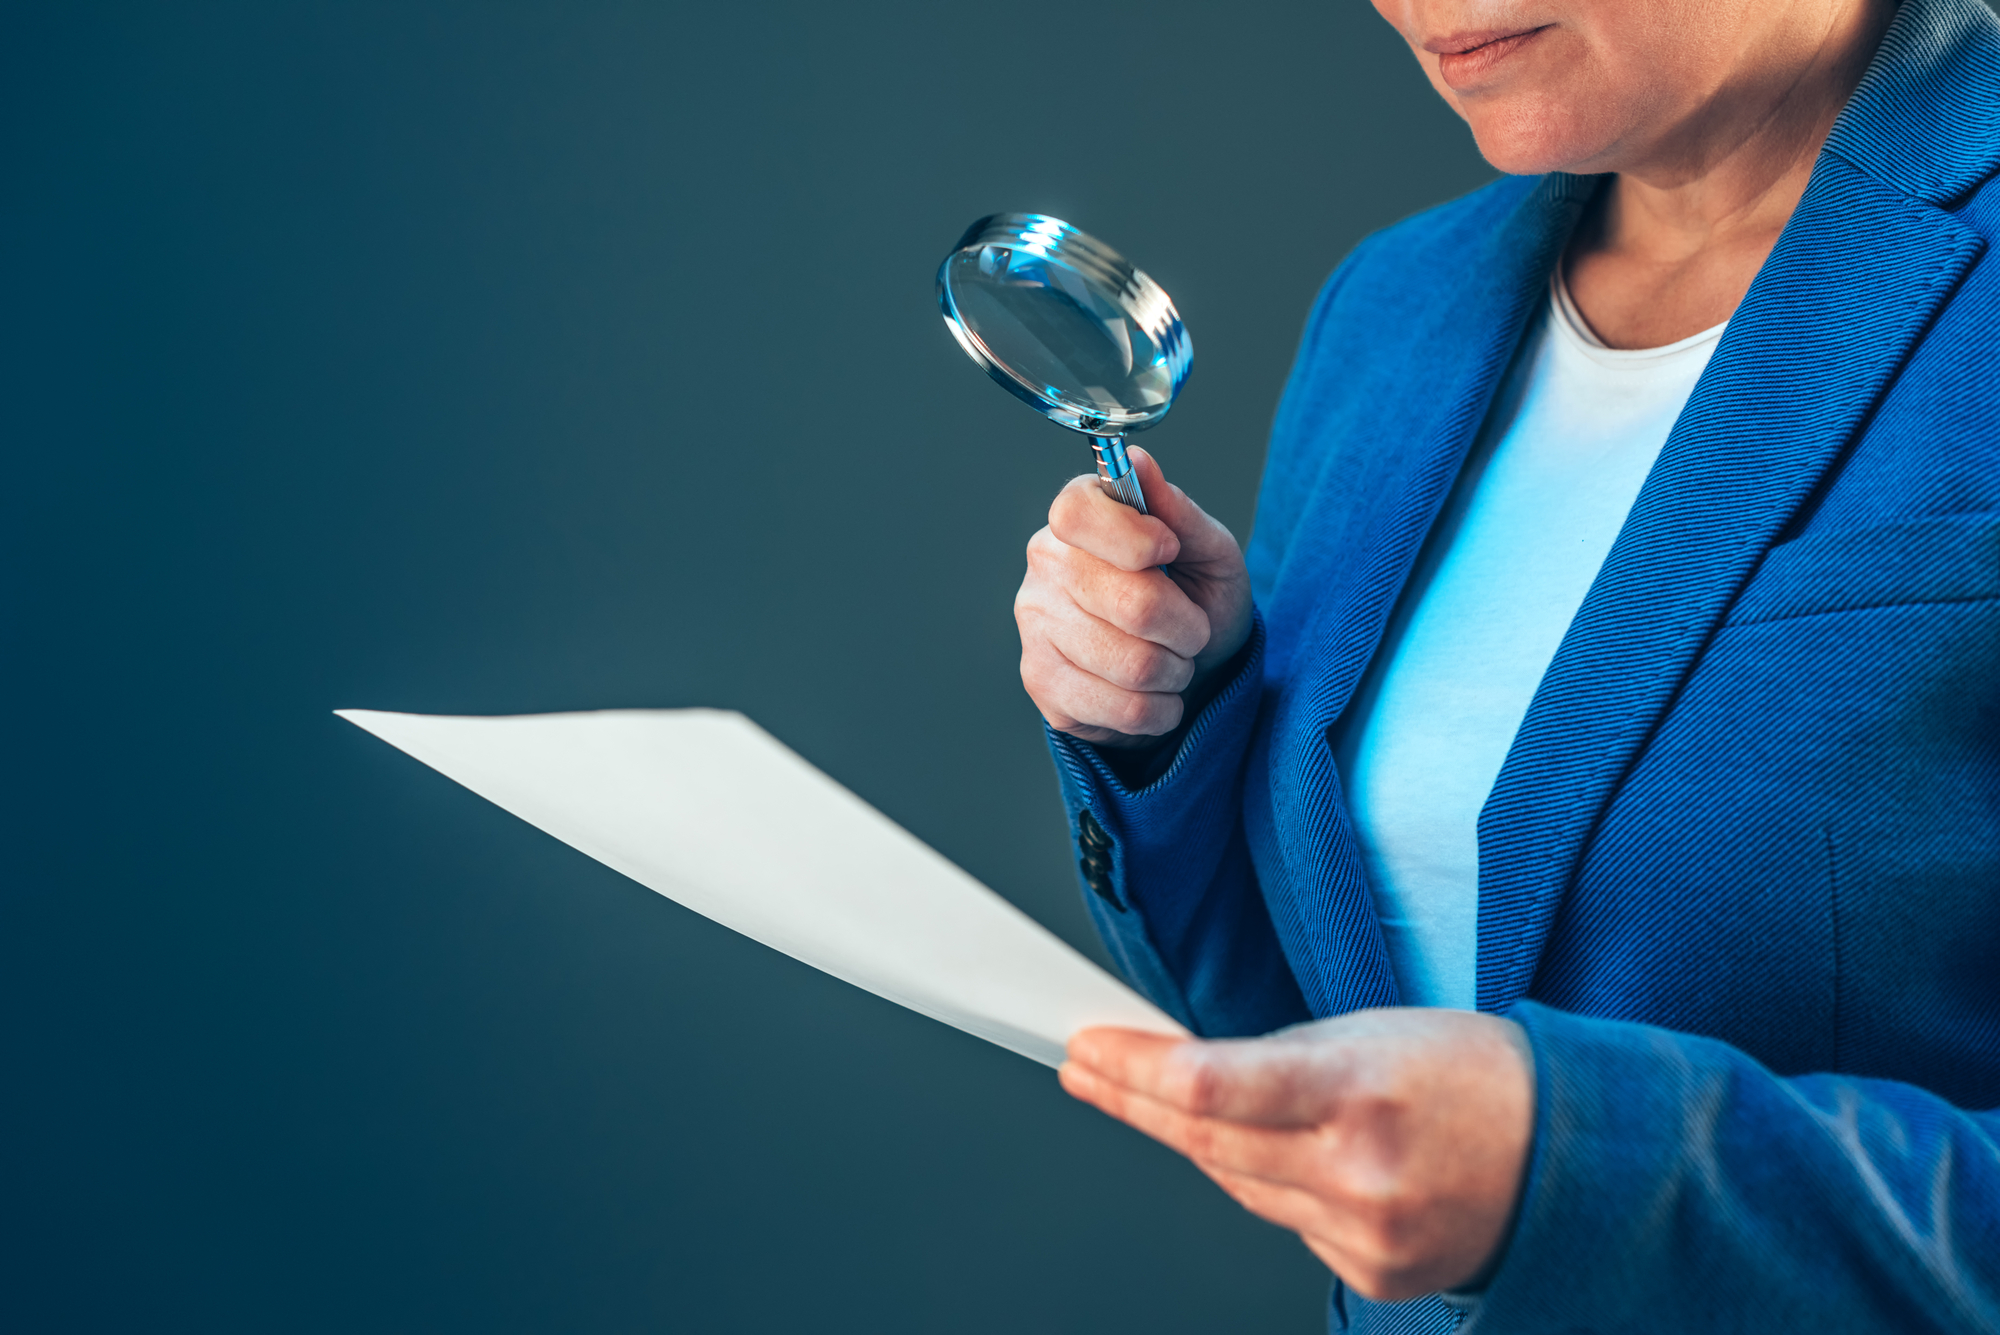 Female tax inspector looking at document with magnifying glass